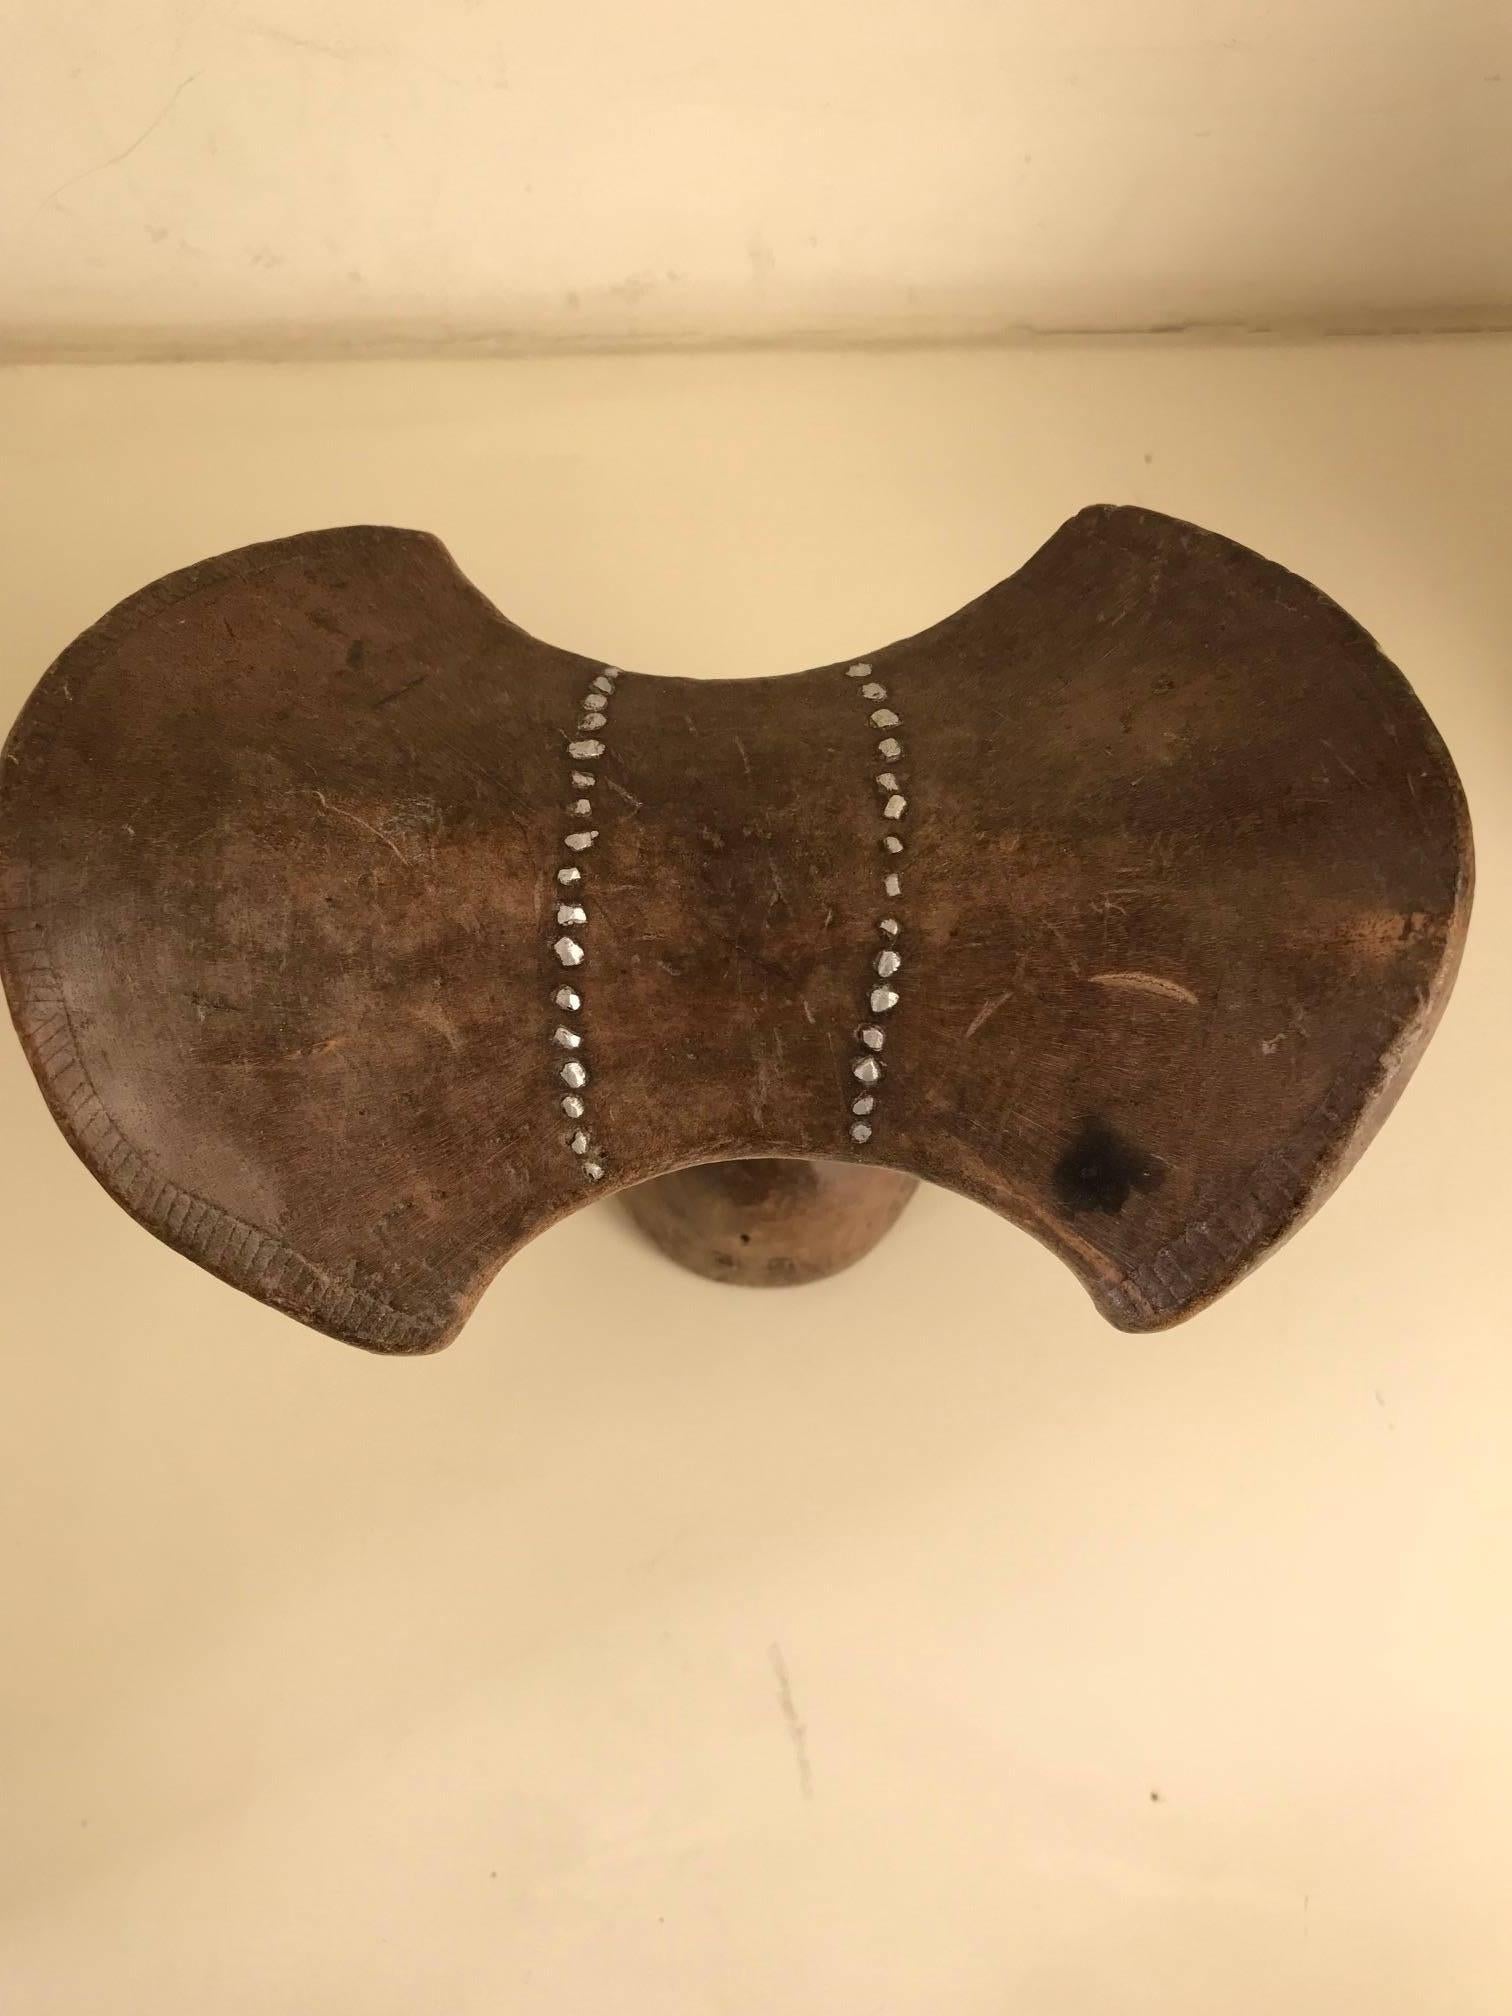 Metal Two Turkana African Headrests, Ethiopian from the Dassanetch People